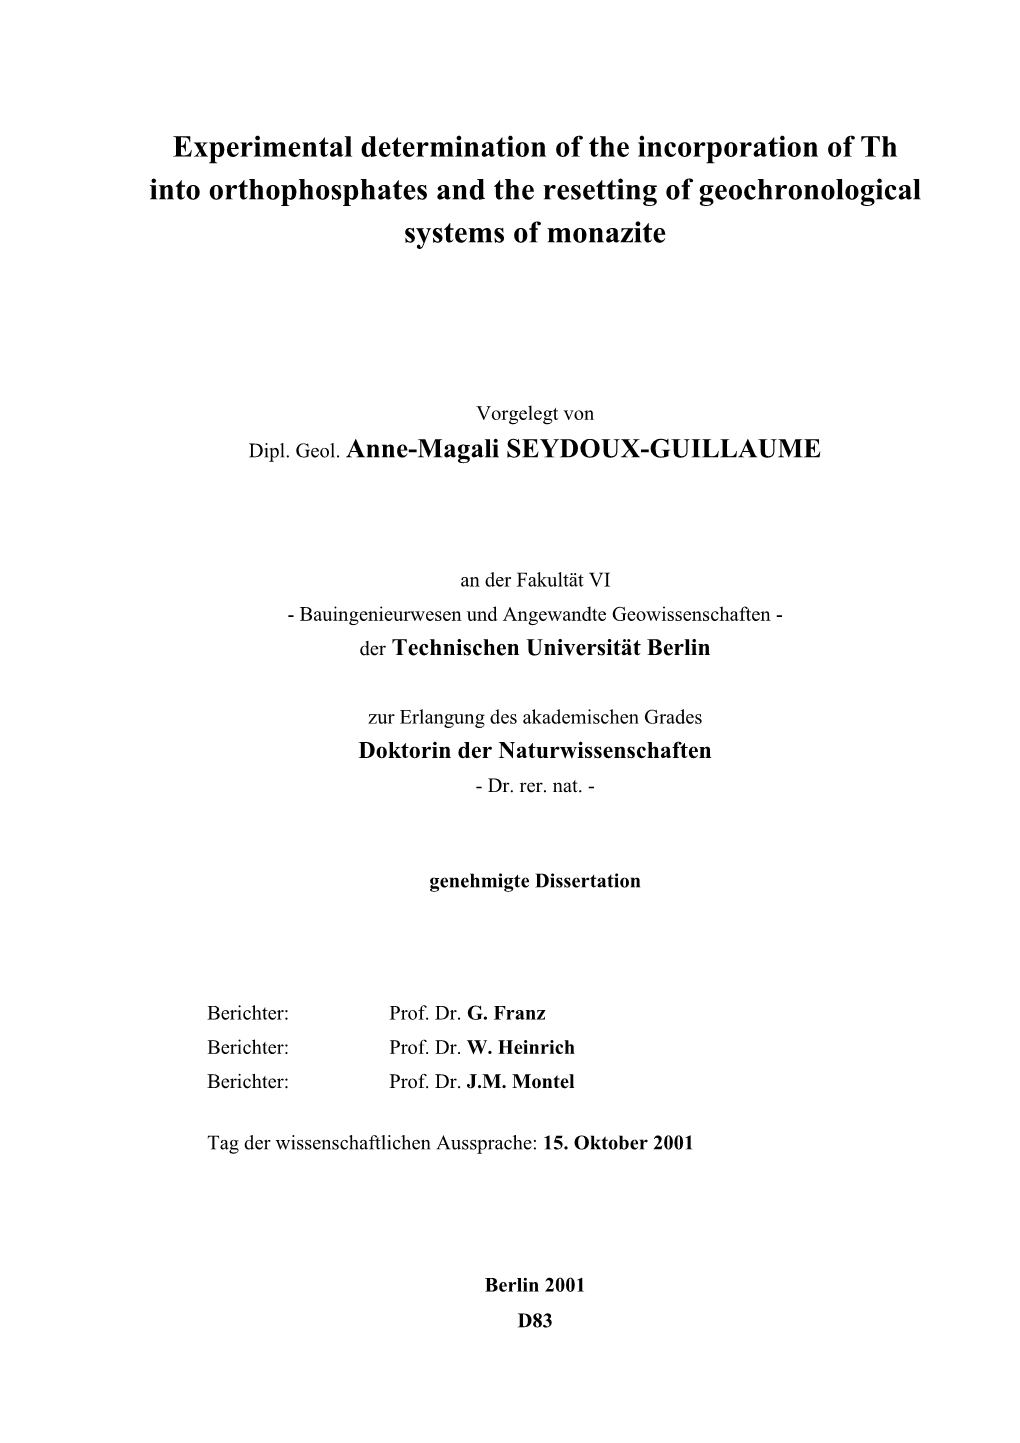 Experimental Determination of the Incorporation of Th Into Orthophosphates and the Resetting of Geochronological Systems of Monazite